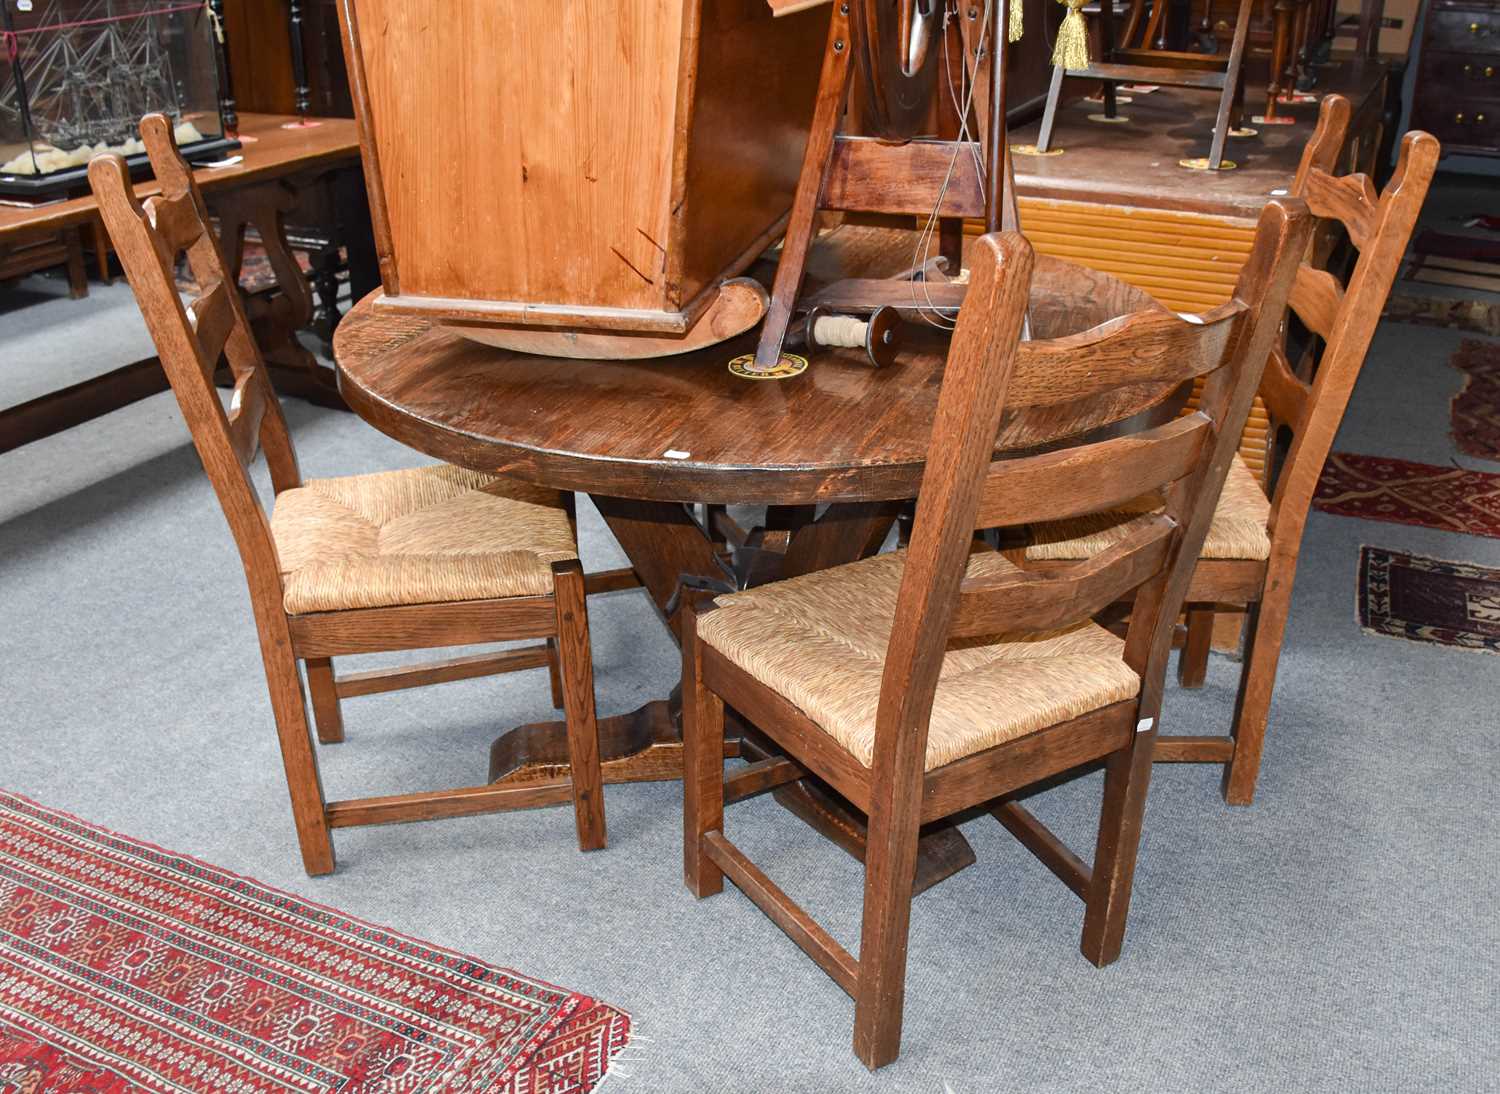 A Rustic Oak Centre Pedestal Kitchen Table, 20th century, 120cm (diameter) by 75cm, together with